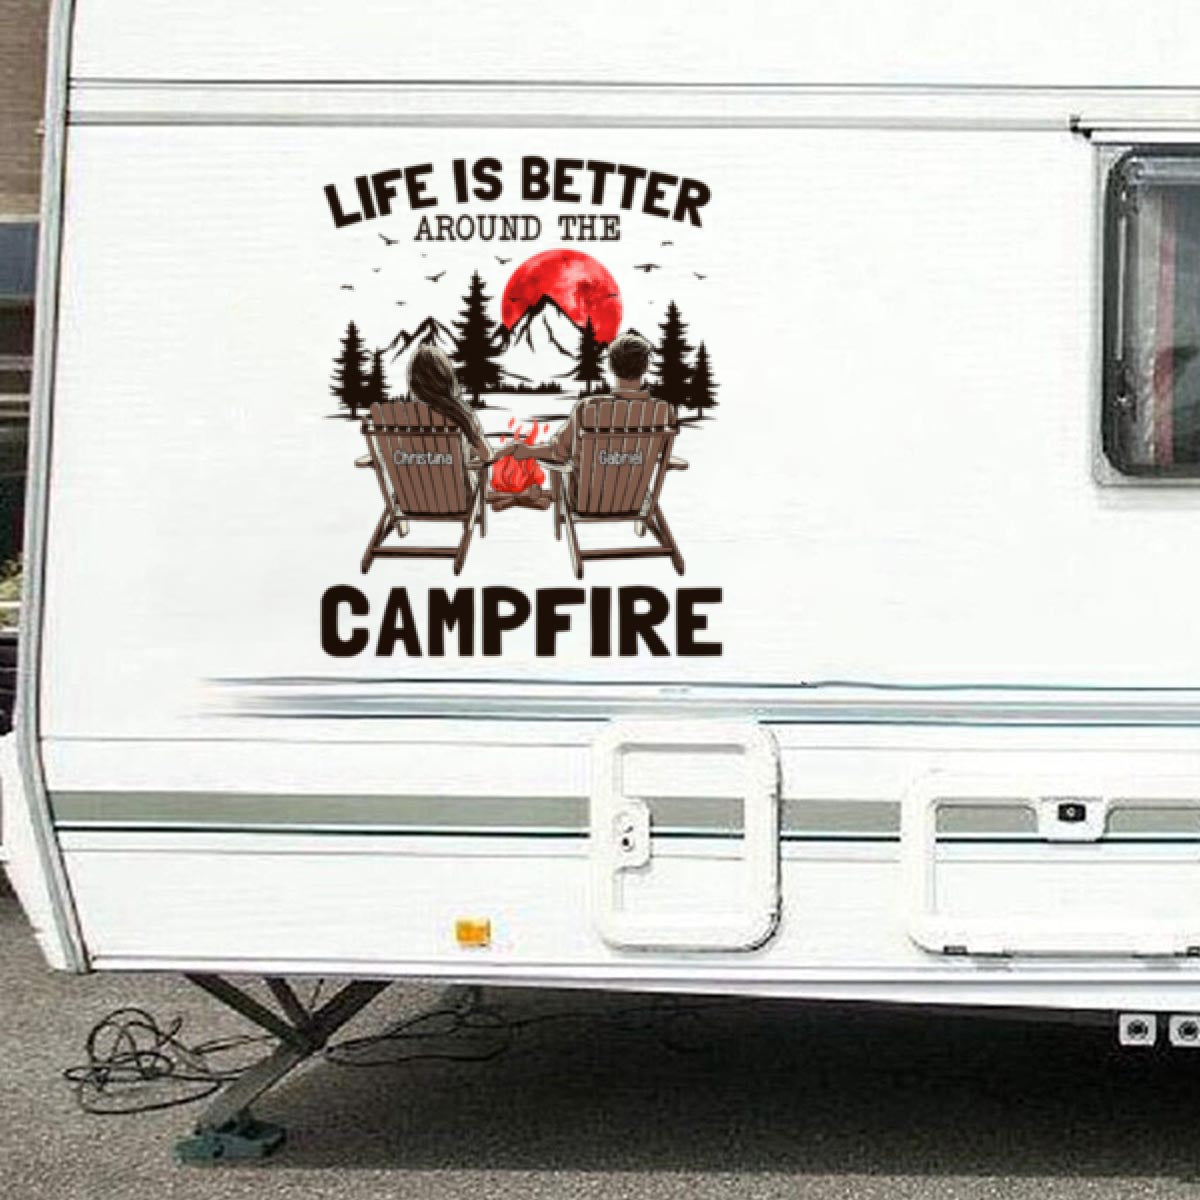 Life Is Better Around A Campfire - Personalized RV Decal